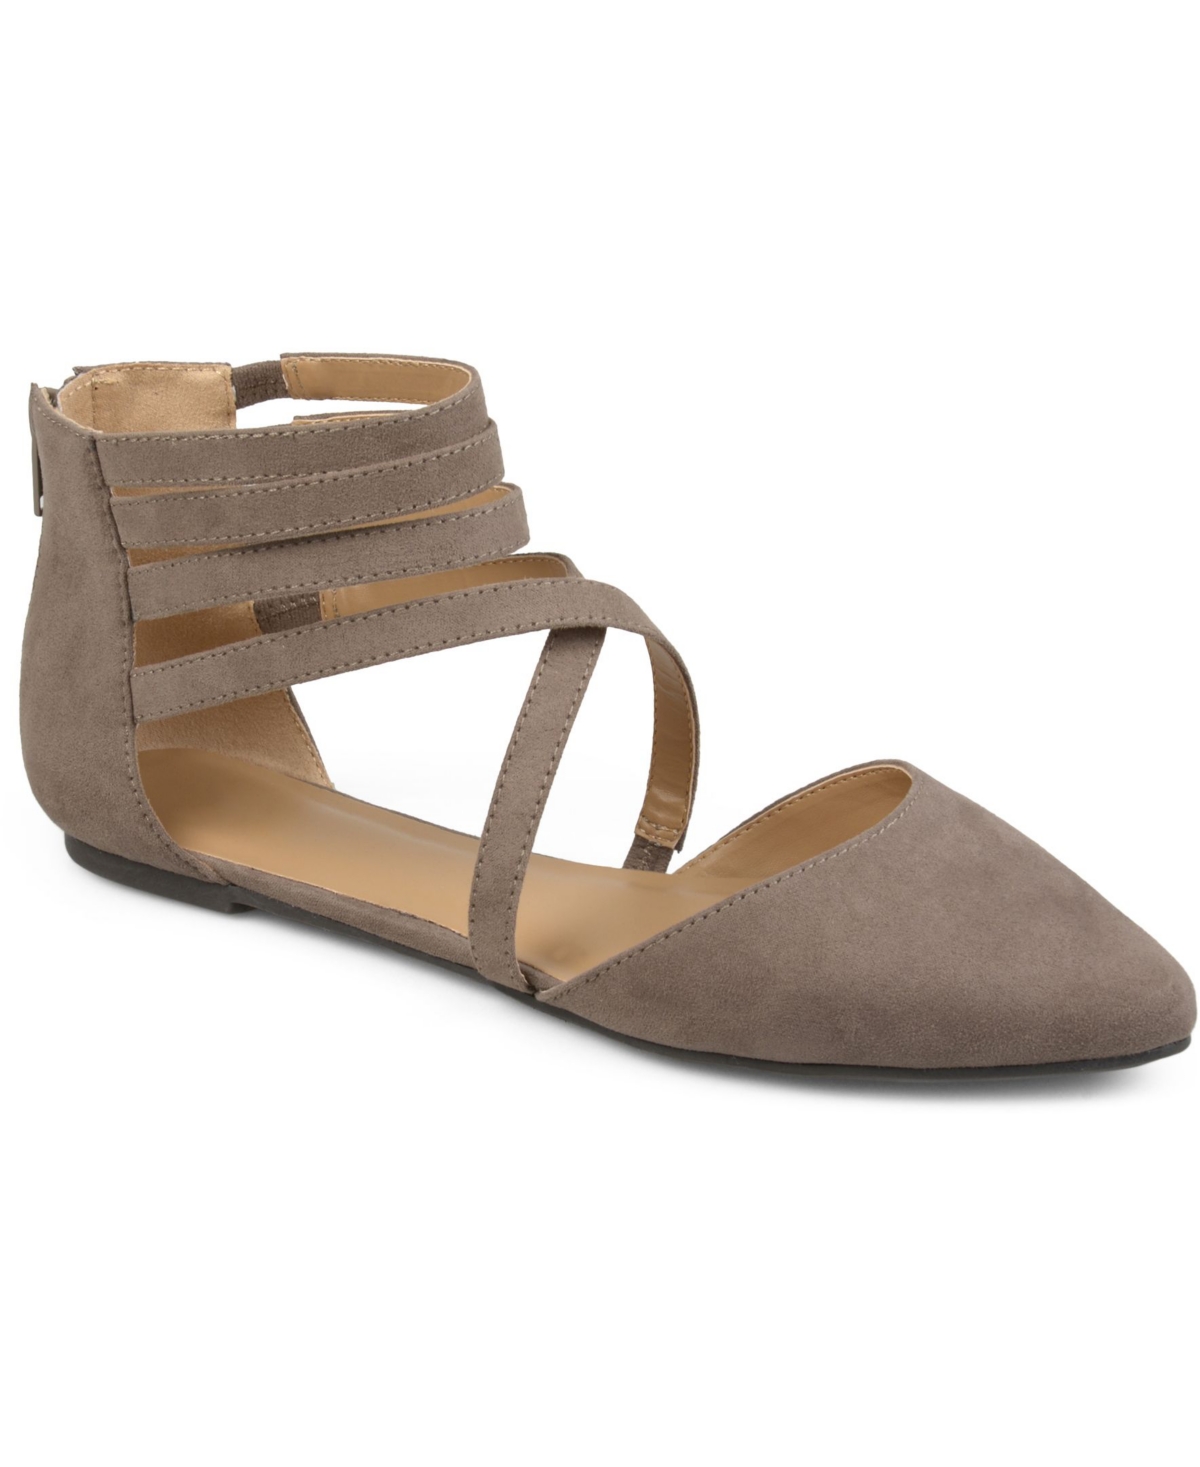 Women's Marlee Strappy Pointed Toe Flats - Taupe